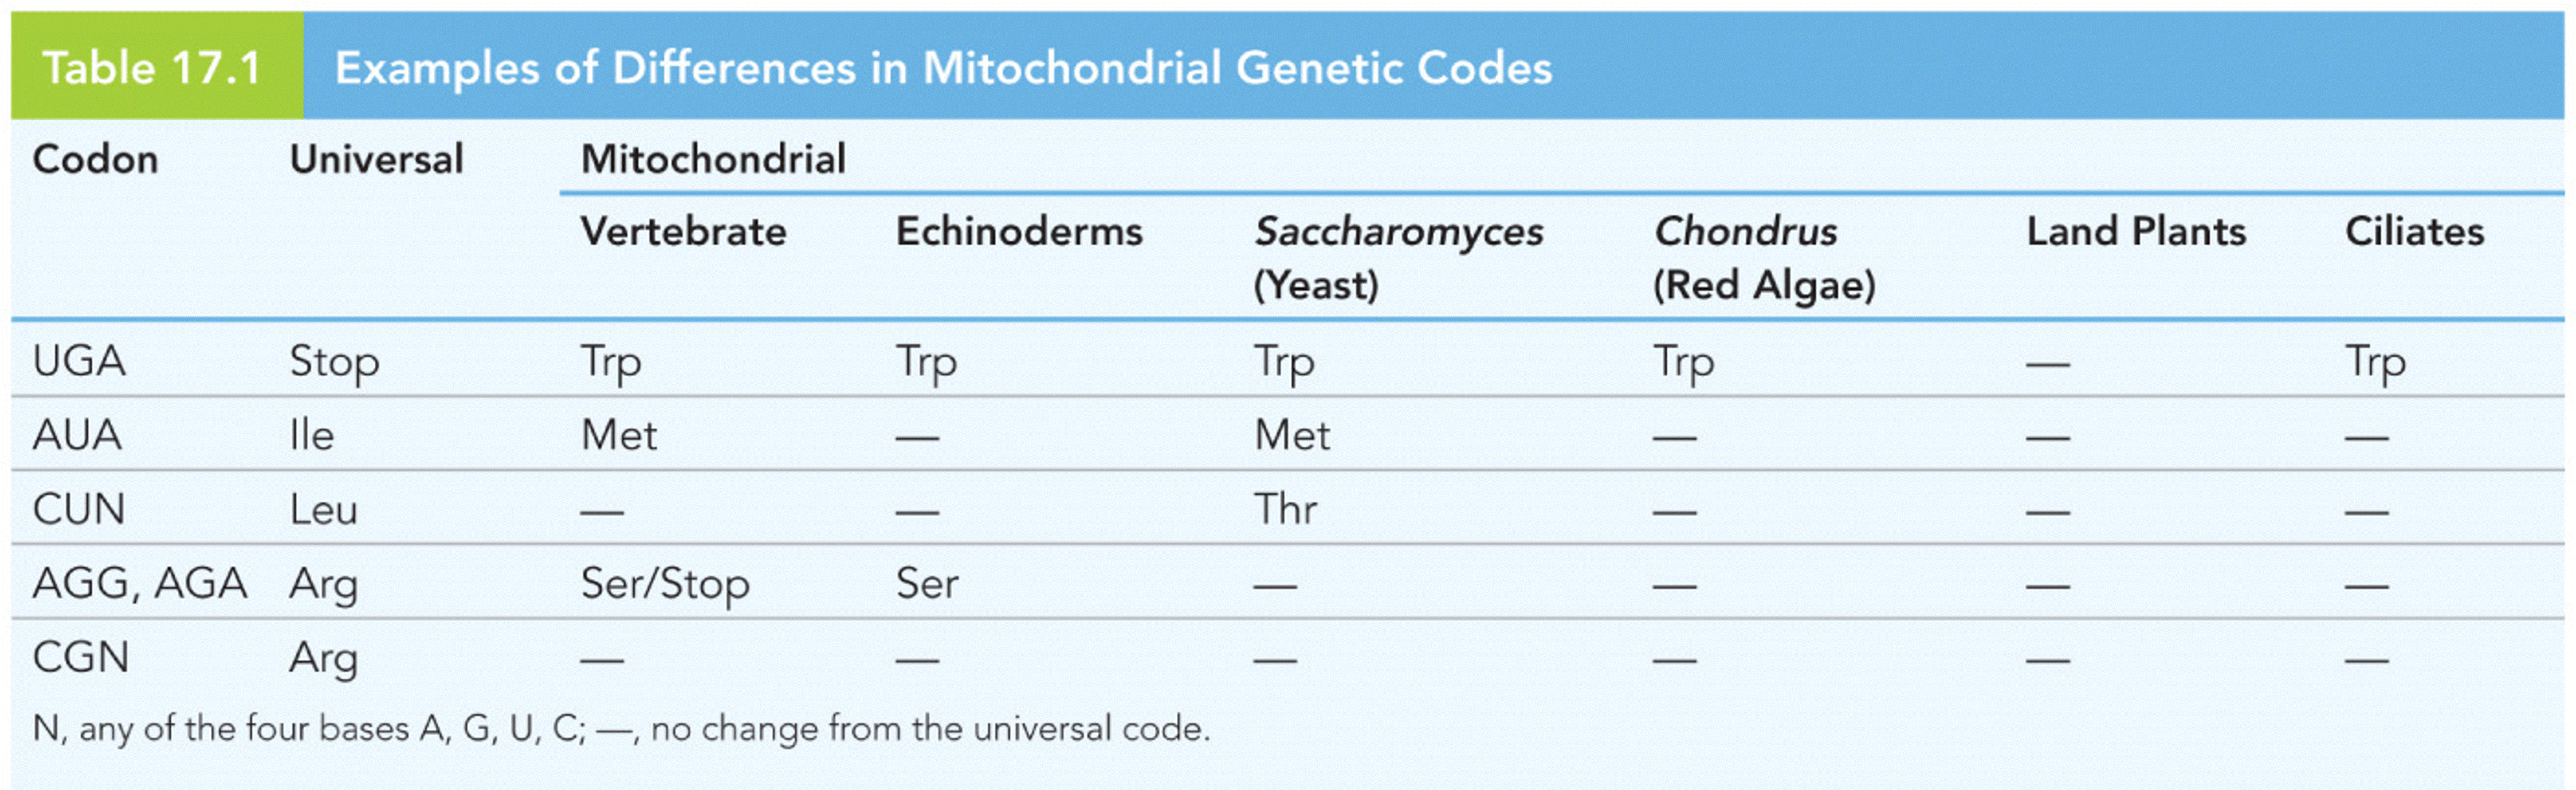 Examples of Differences in Mitochondrial Genetic Codes